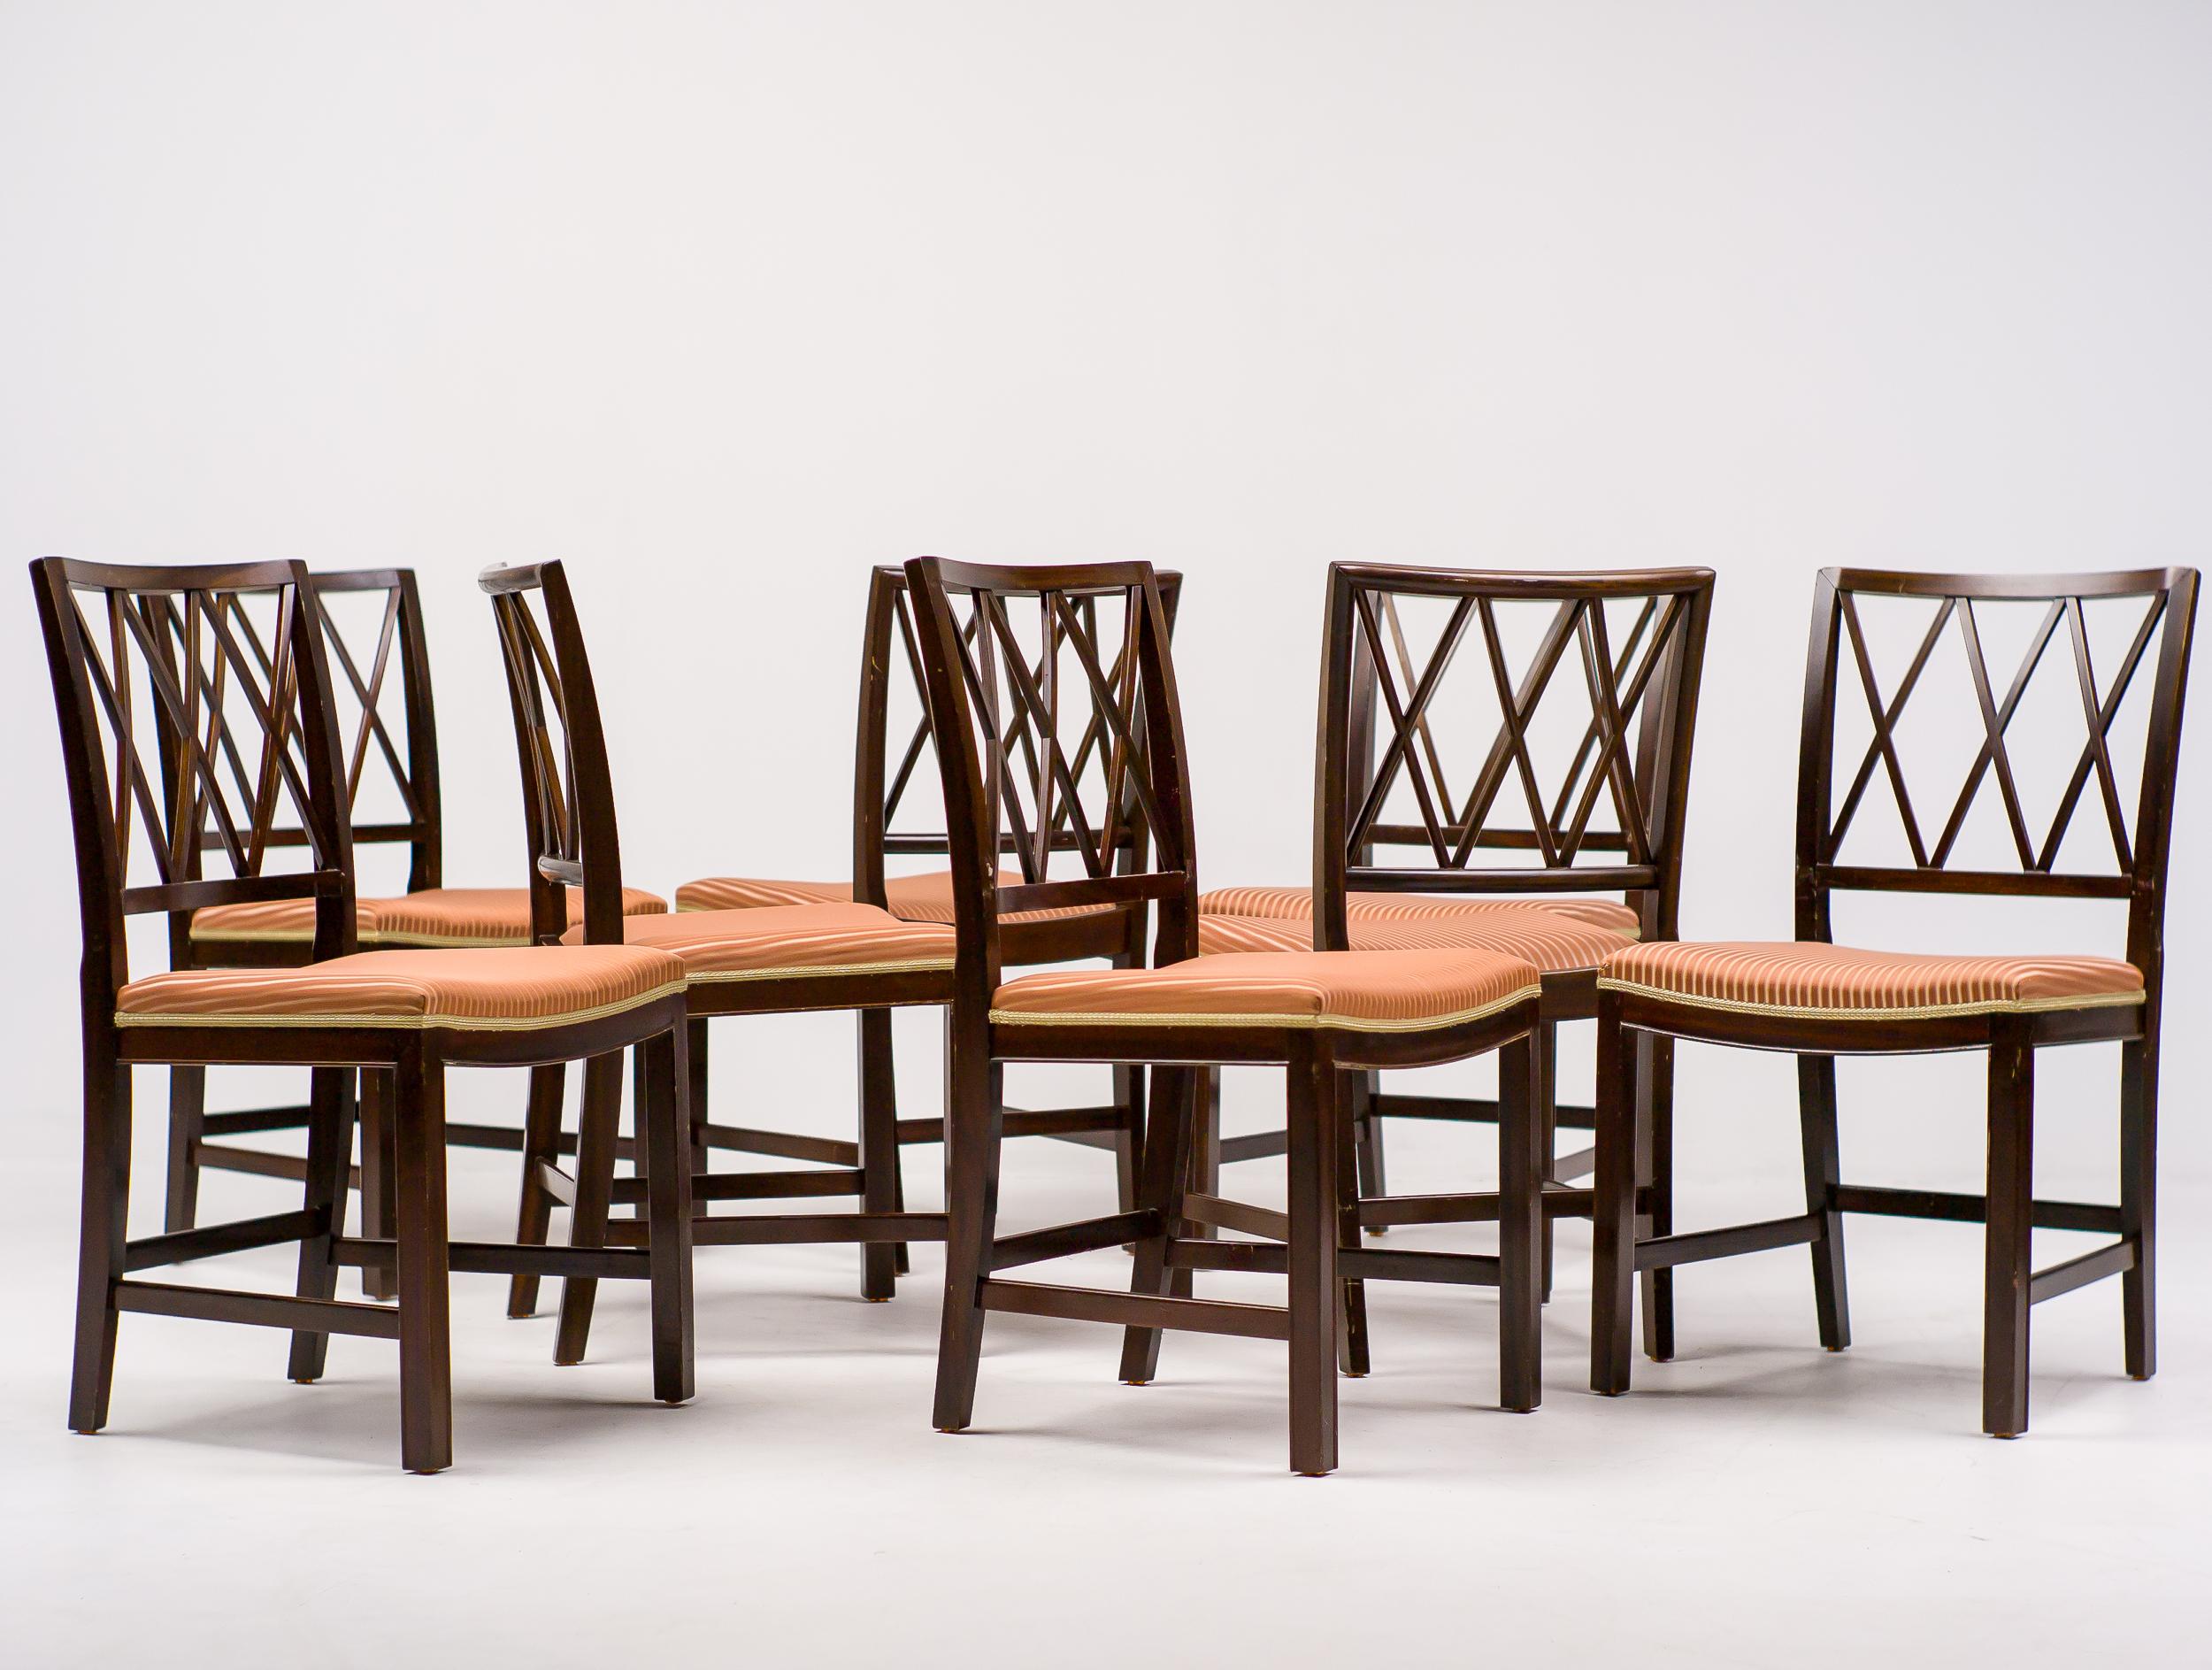 A beautiful matching set of eight Ole Wanscher dining chairs upholstered in original striped fabric. Frame made in dark stained mahogany. Unrestored all original condition with some wear to the finish. These chairs show the great craftsmanship and